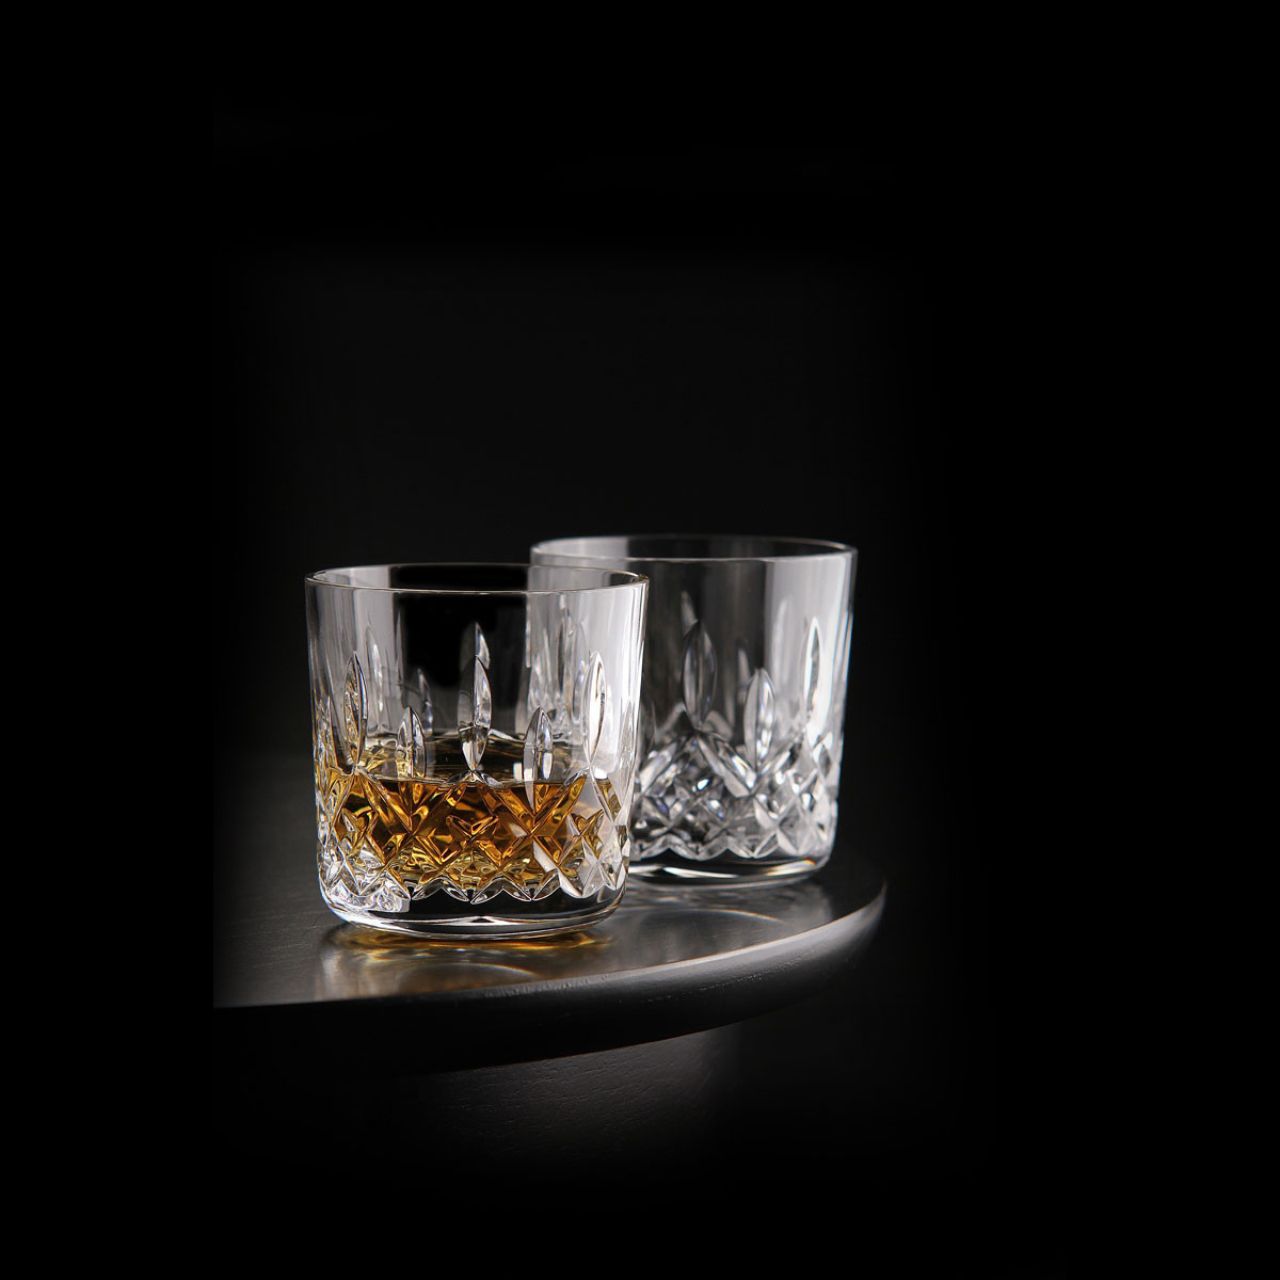 Waterford Crystal Lismore Connoisseur Straight Sided Tumbler Pair  The Waterford Lismore Connoisseur Whiskey Series respects and reveres whiskeys of all varieties with a flight of hand crafted crystal tasting glasses, each one individually shaped and designed for a specific whiskey to be enjoyed straight, neat, or on the rocks.